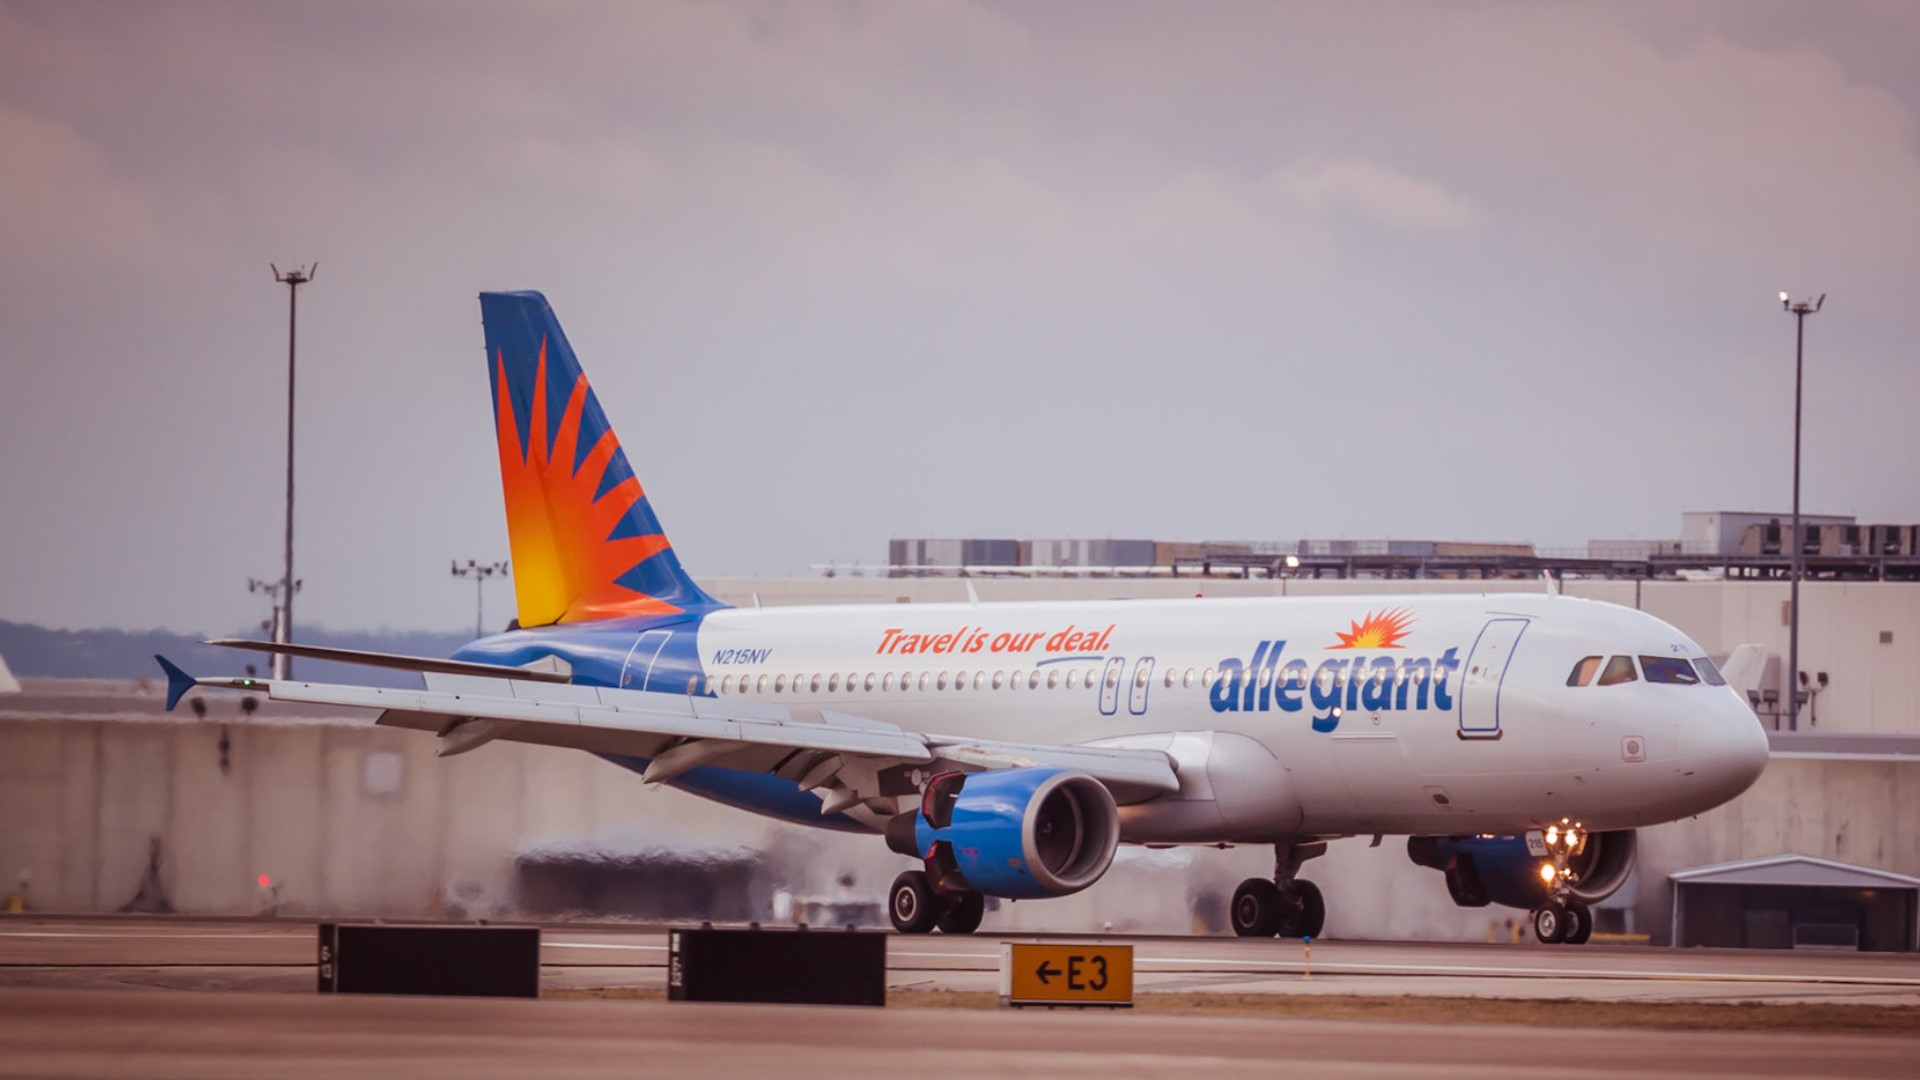 The service from Allegiant Air was supposed to begin in 2020, but was delayed because of the coronavirus pandemic.